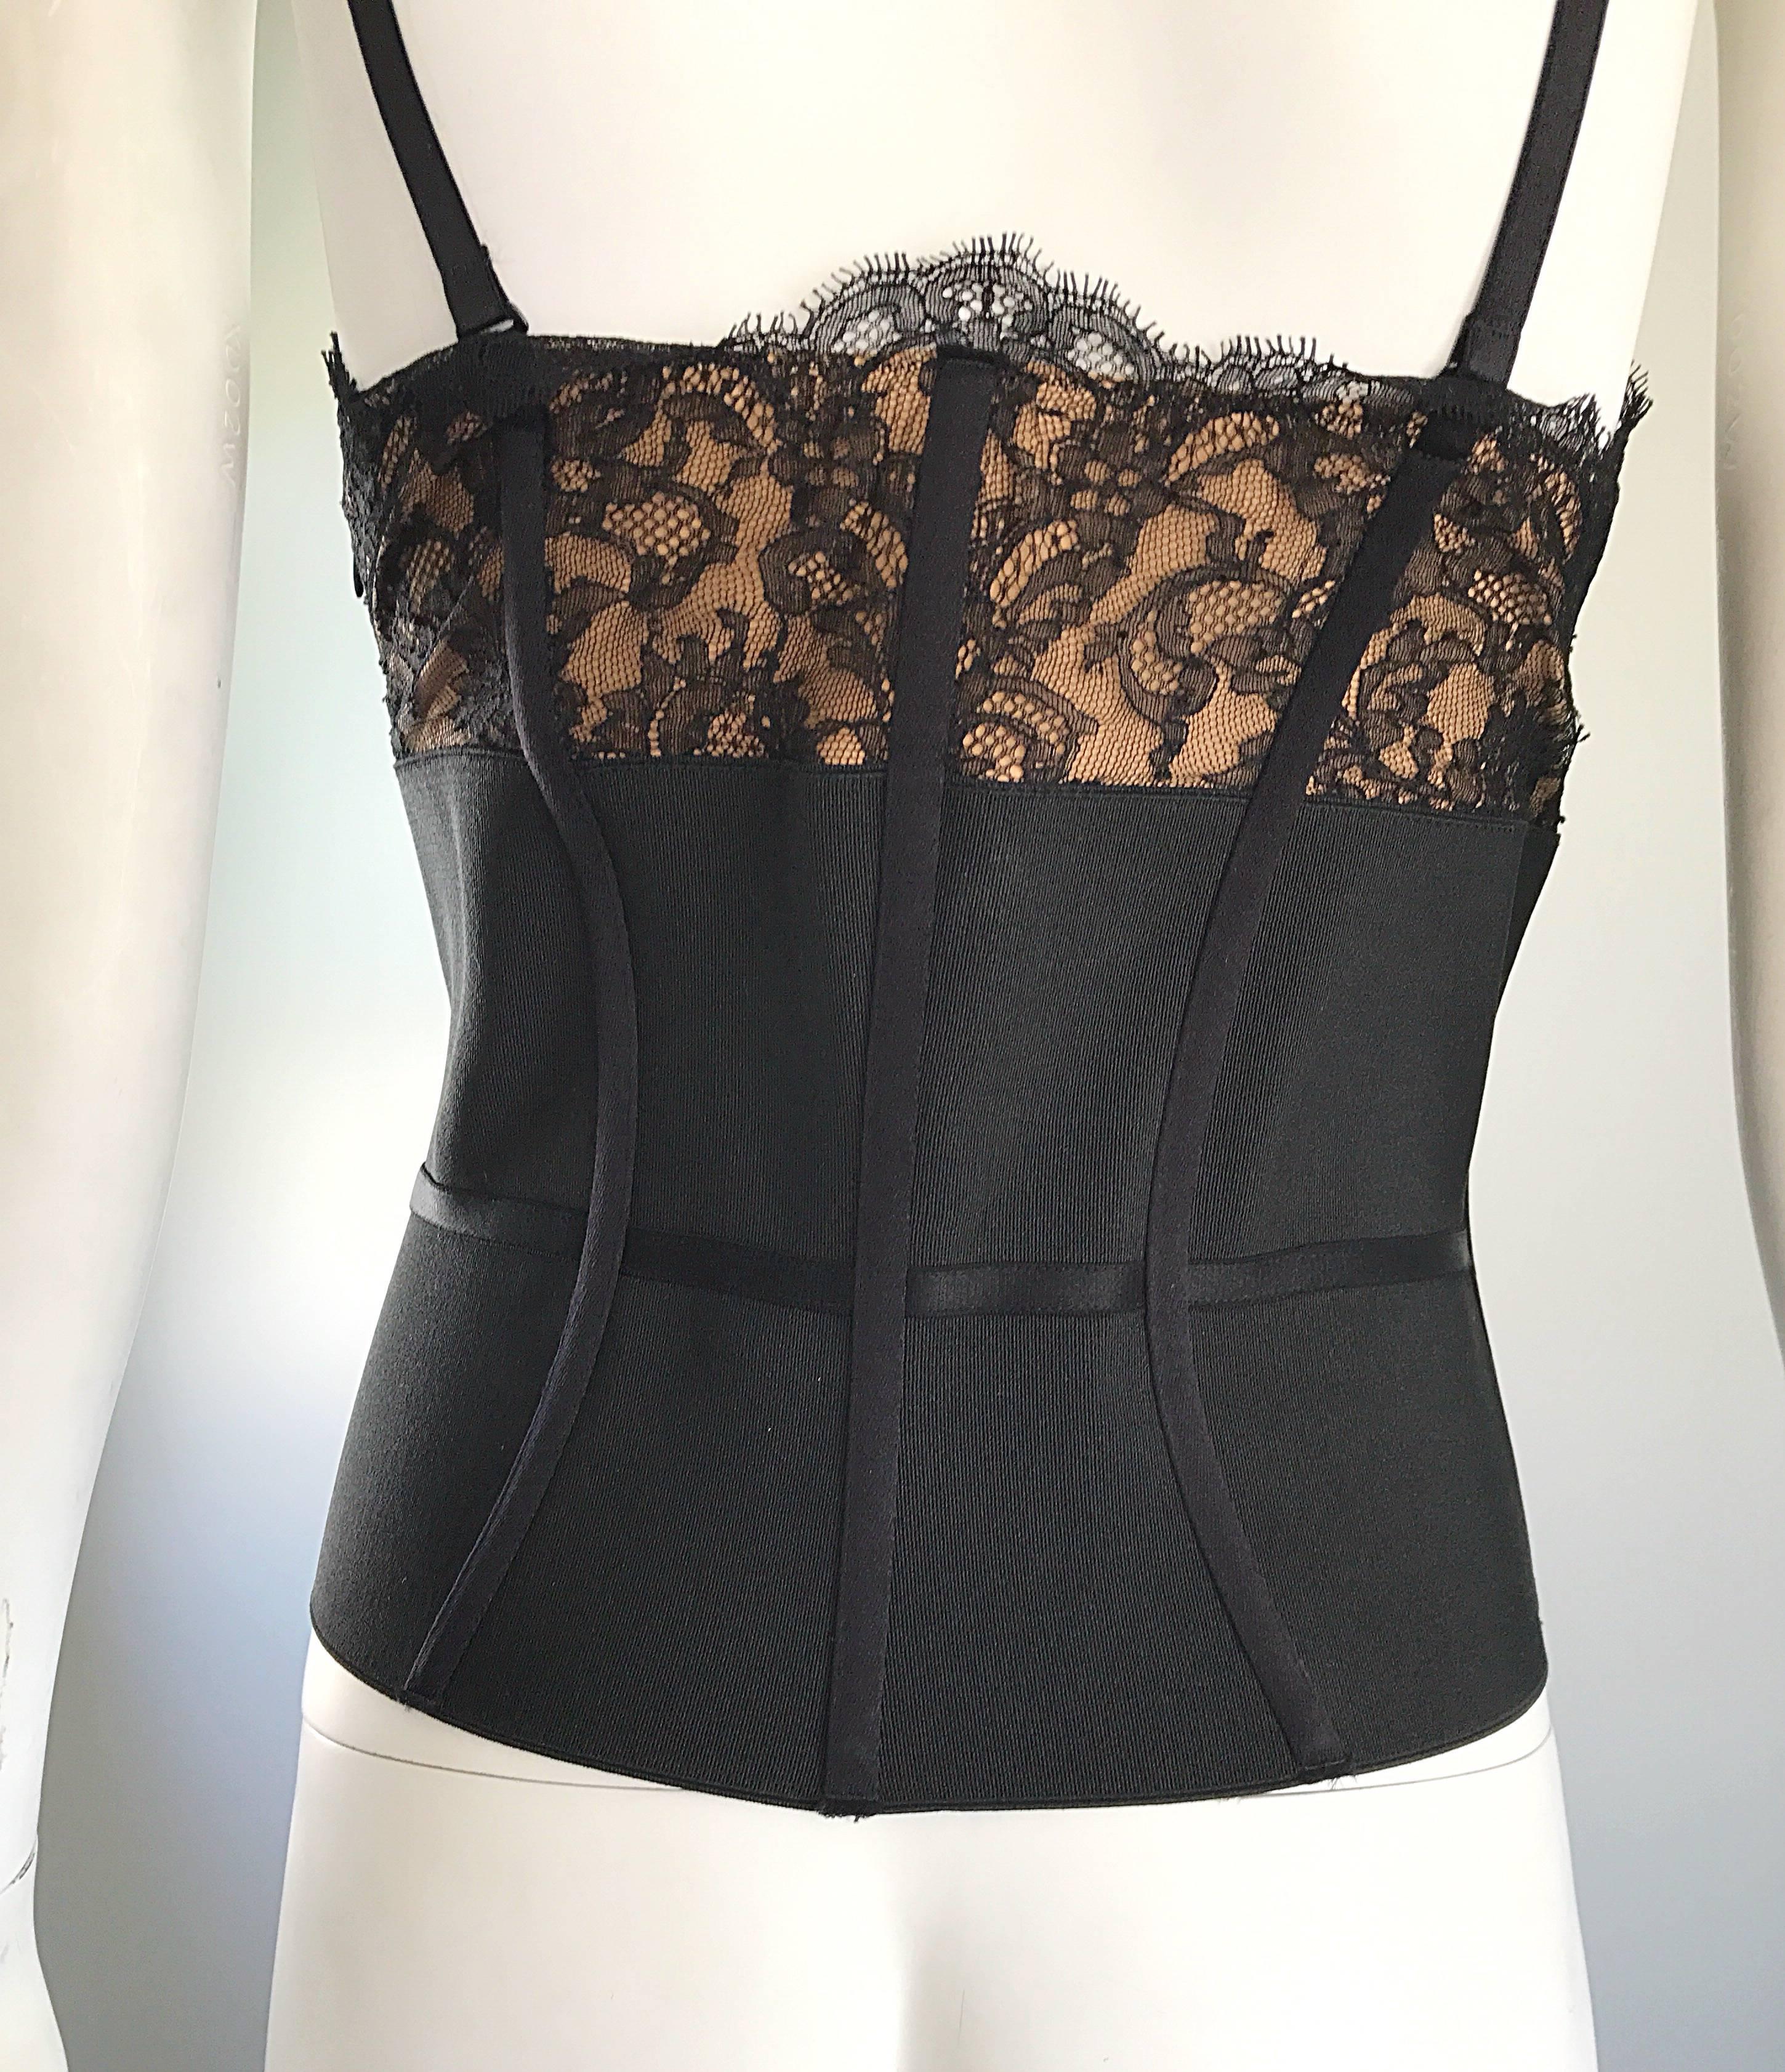 New 1990s La Perla Black and Nude Lace Sexy Vintage 90s Bustier Corset Top For Sale 1